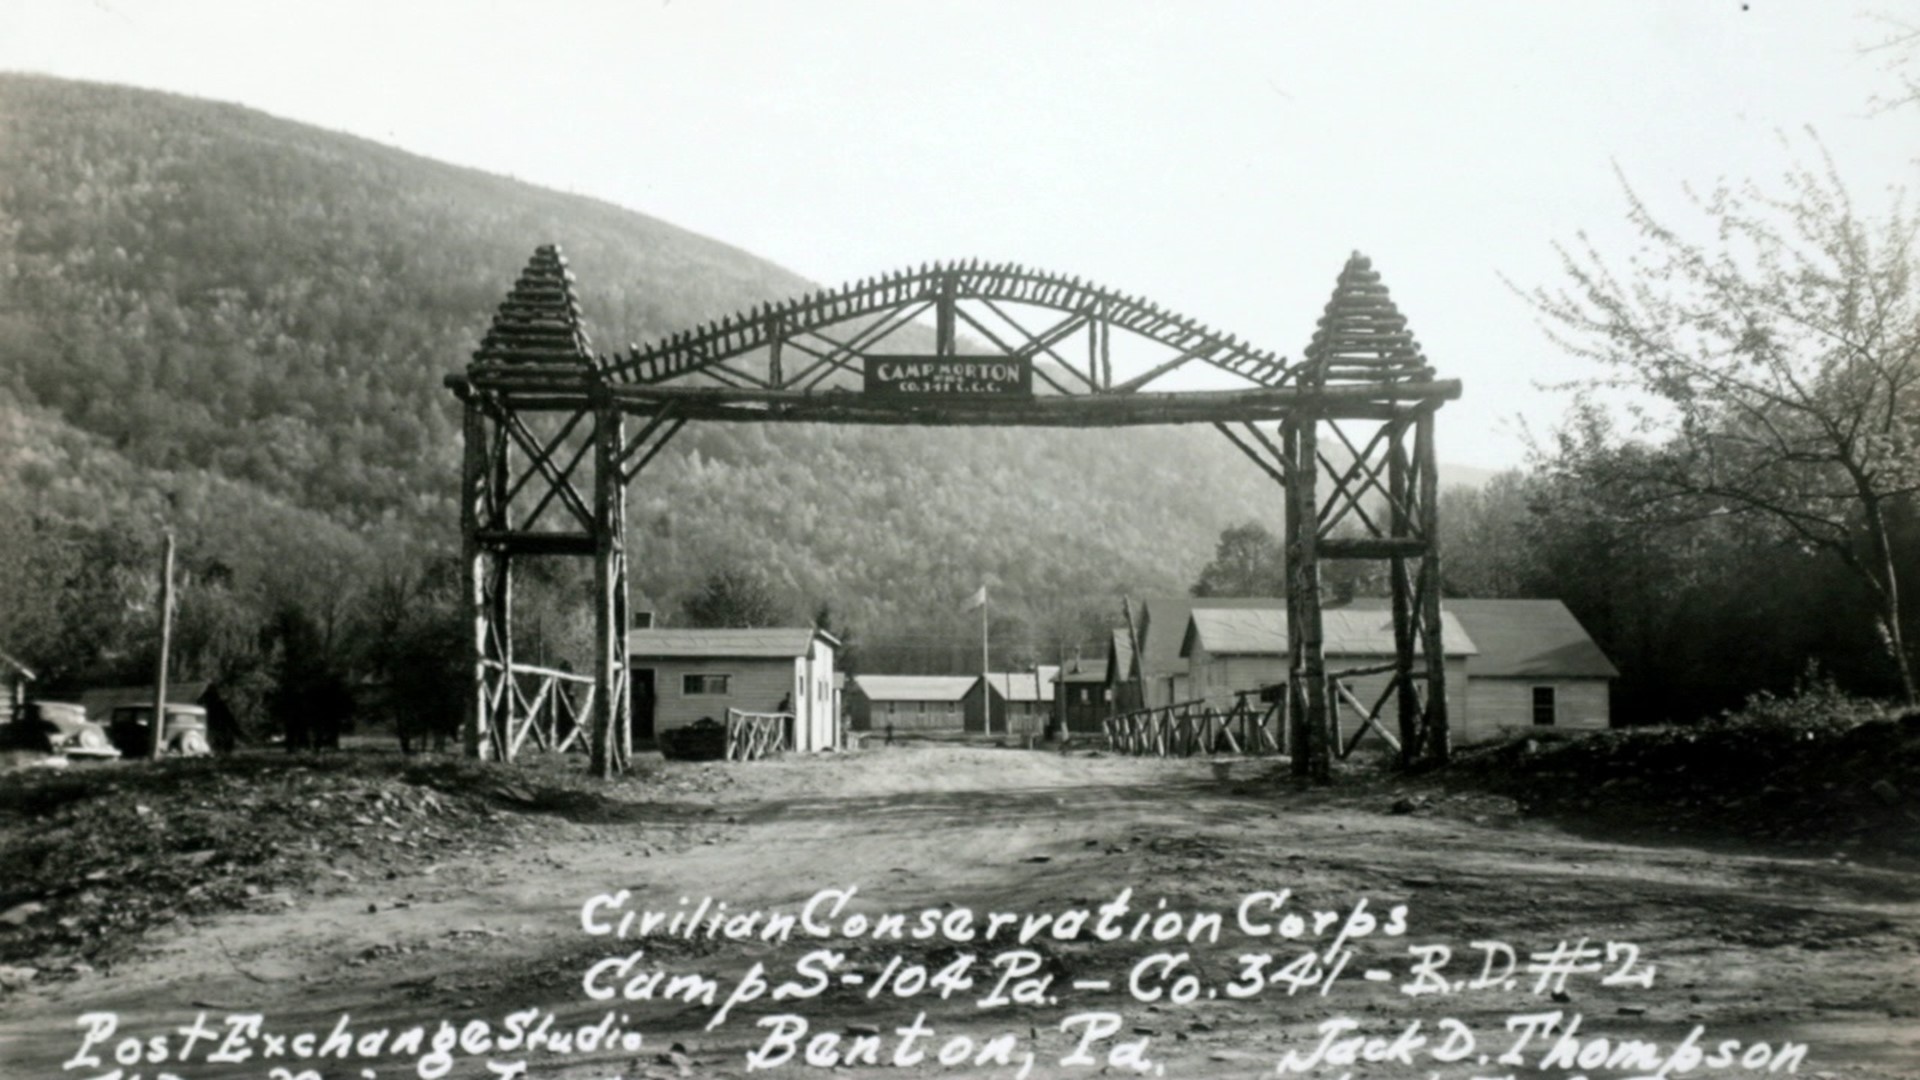 Civilian Conservation Corps camps once dotted rural Pennsylvania, part of the plan to get people back to work during the Great Depression.